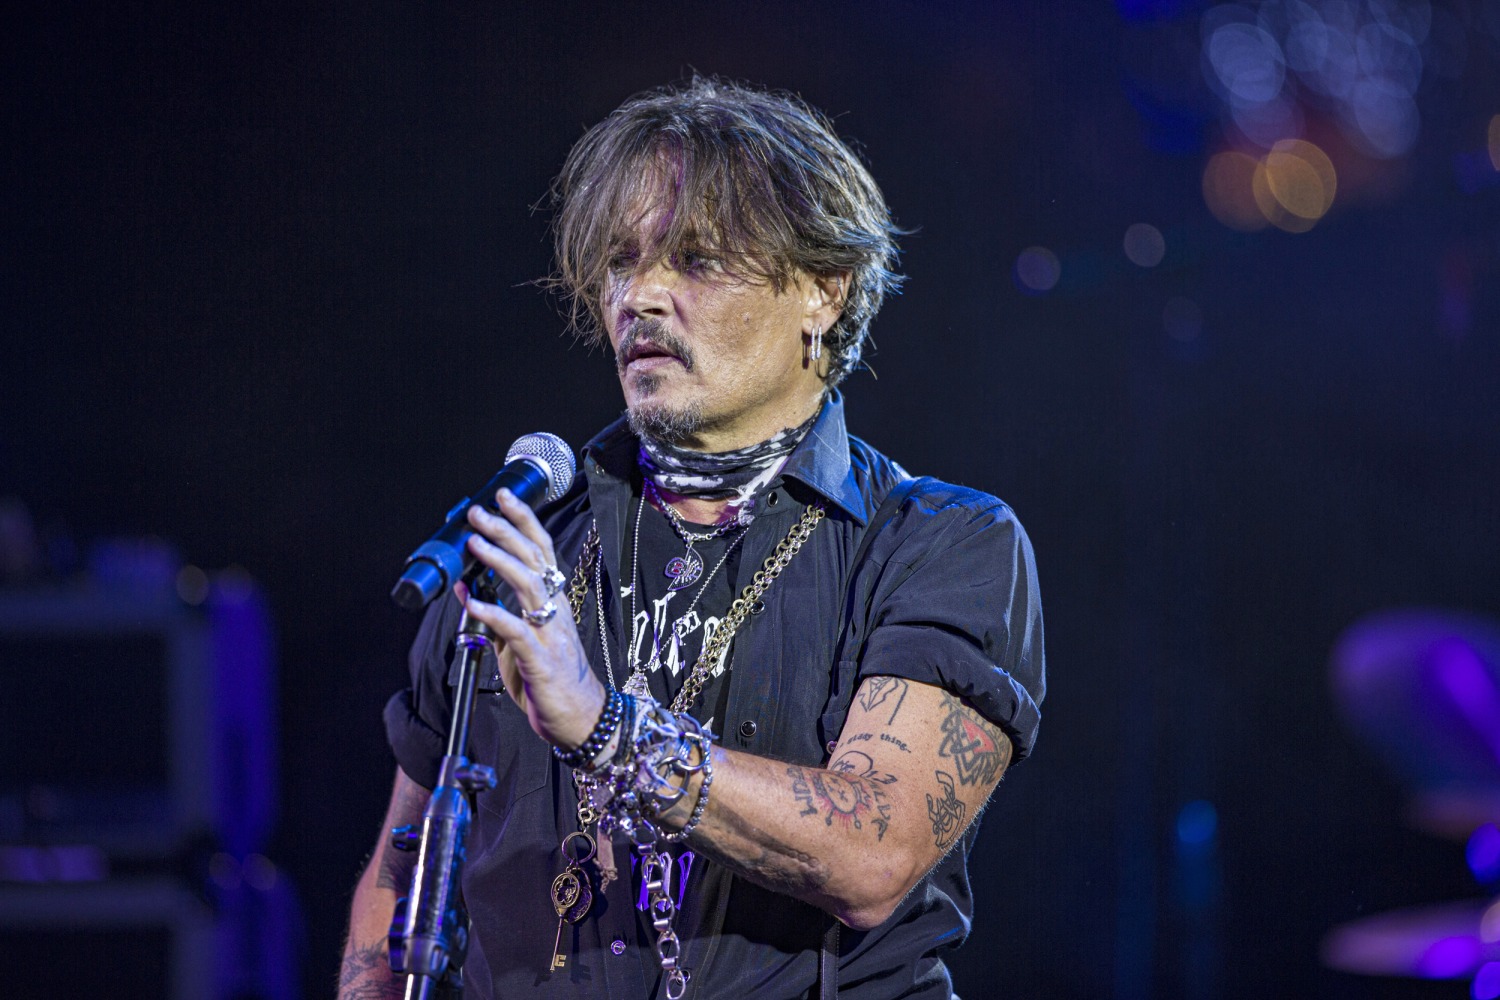 Johnny Depp gave a surprise performance for his fans in London